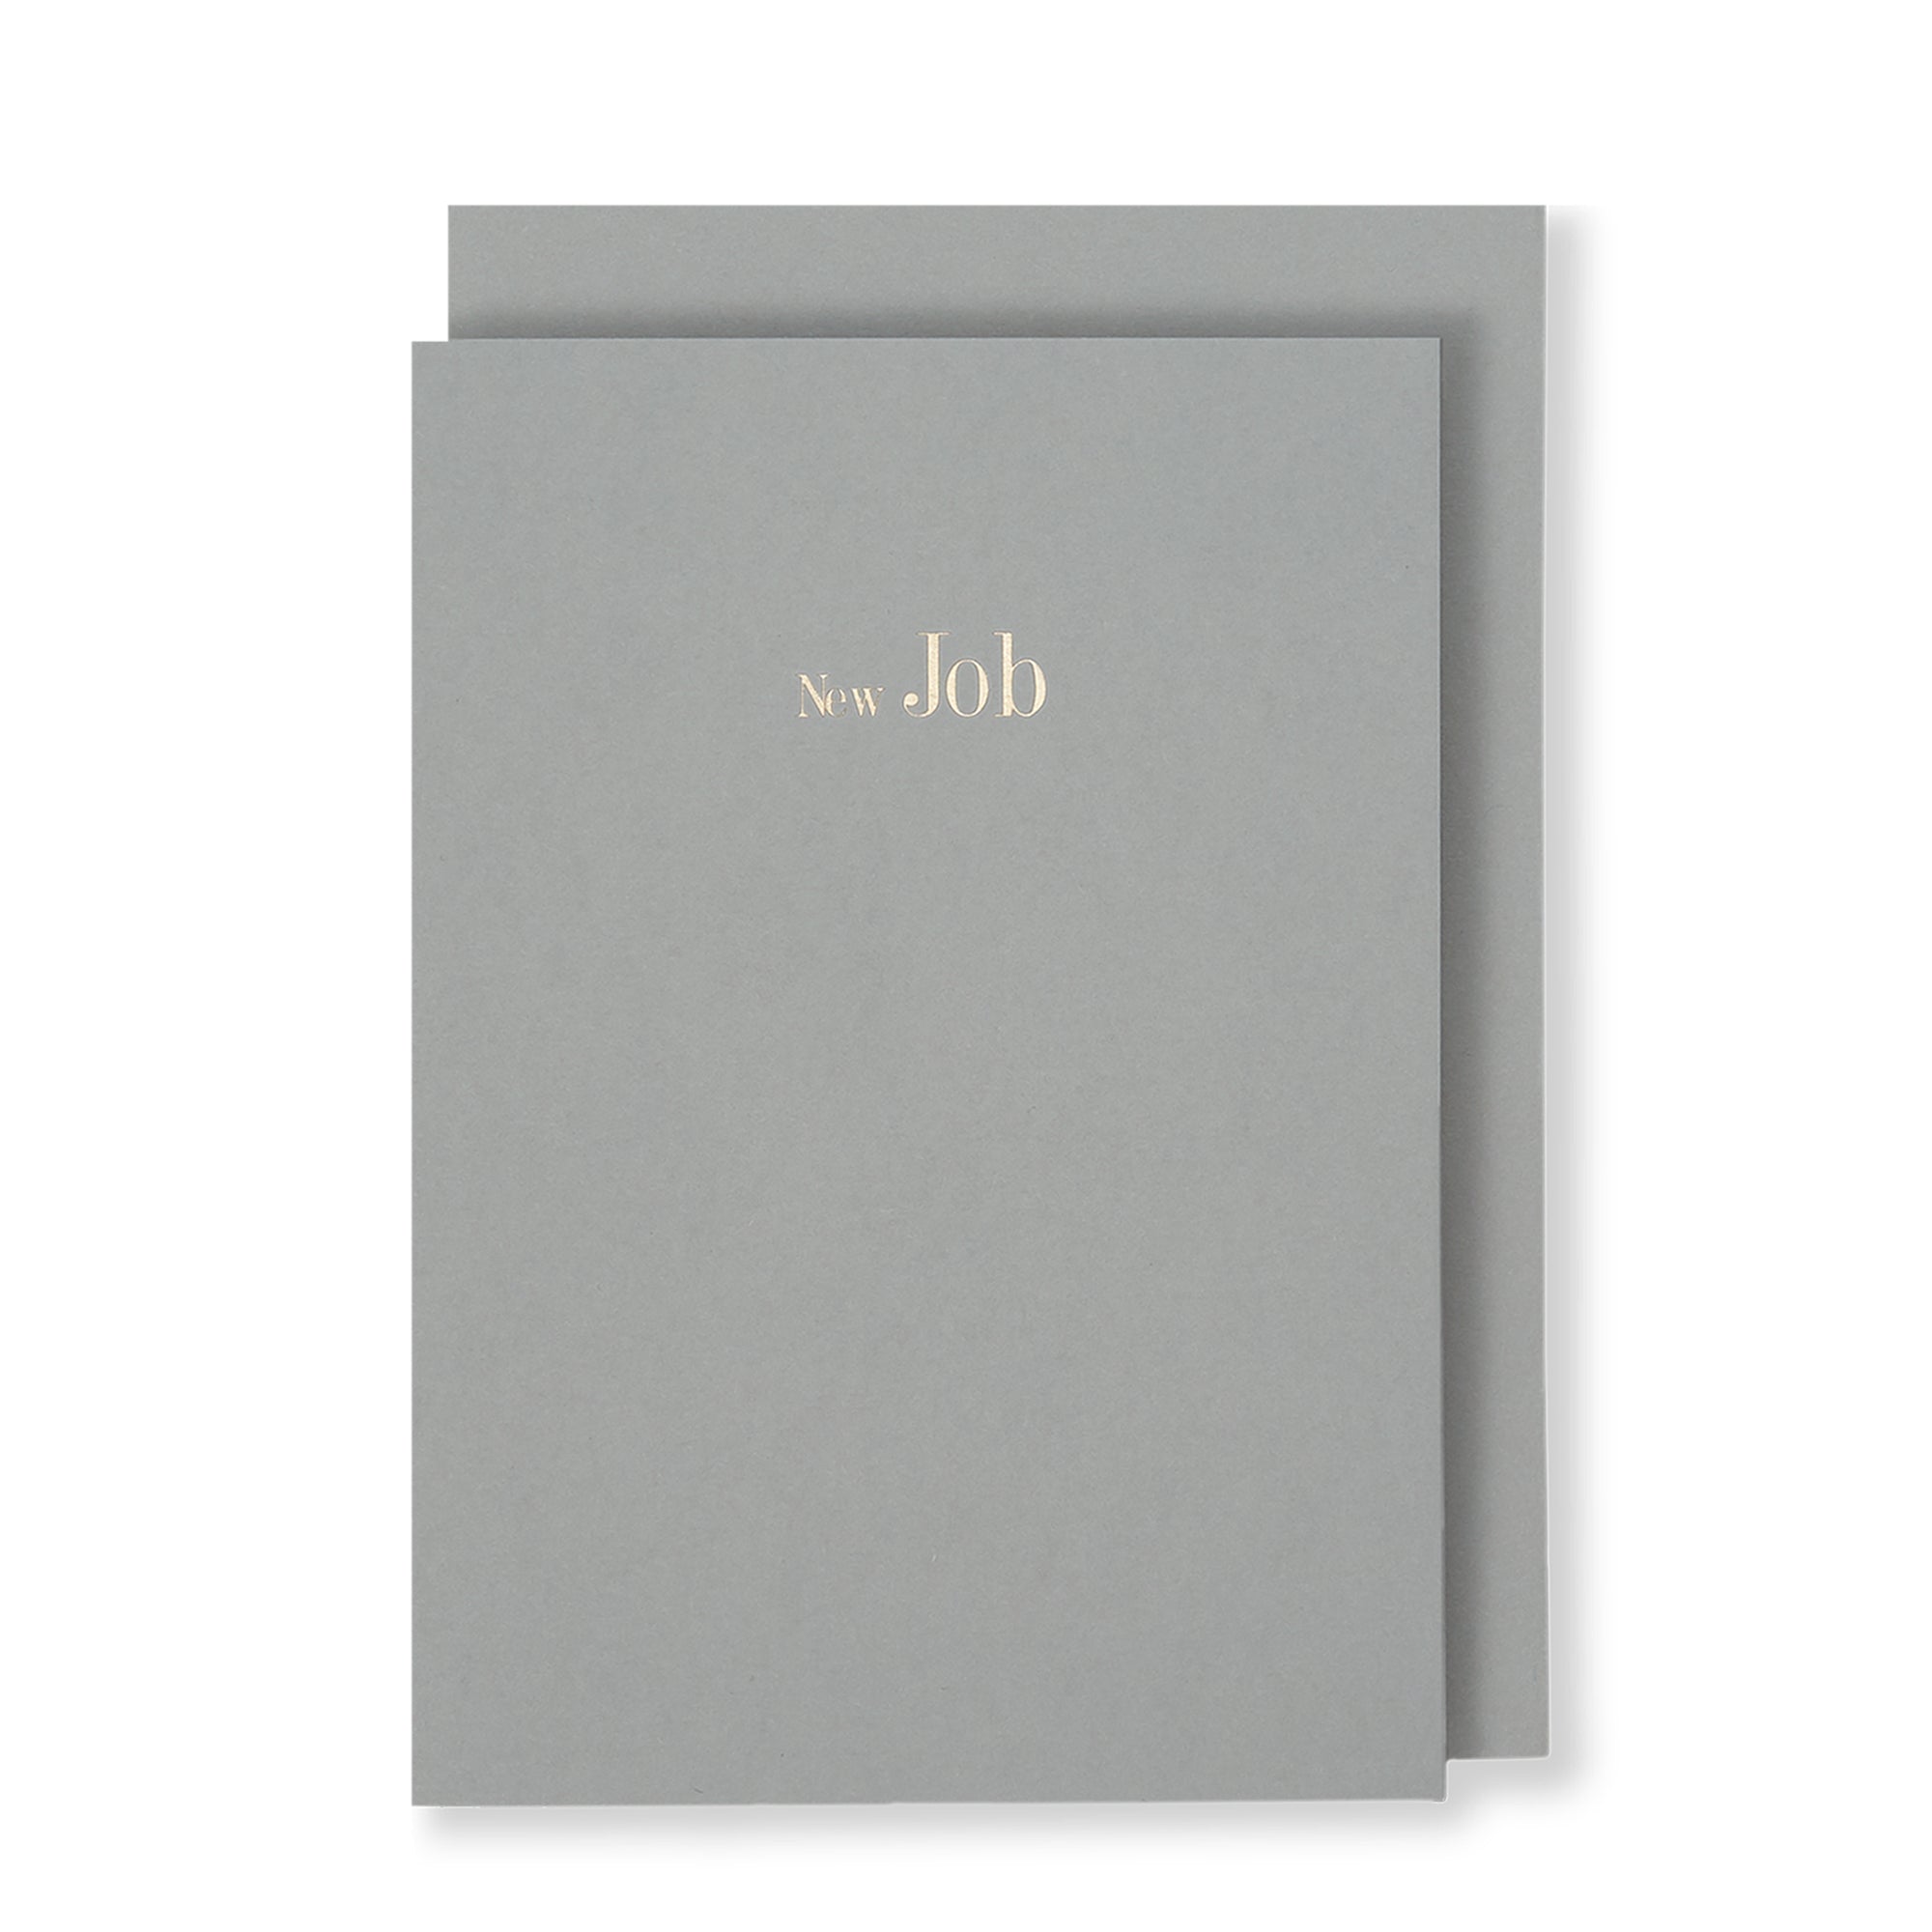 New Job Greeting Card in Grey, Front